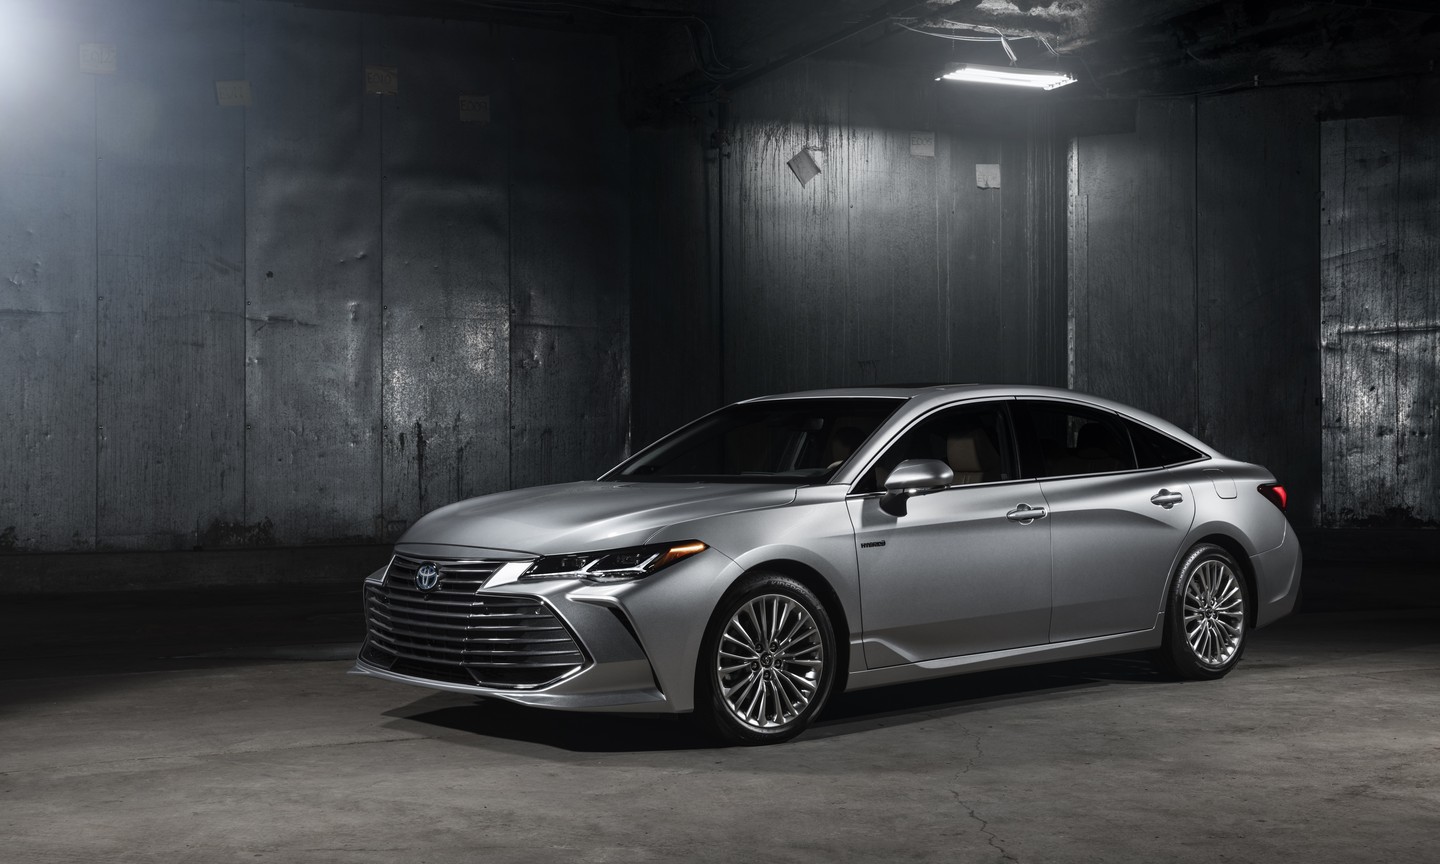 2019 Toyota Avalon review: Smooth operator with acquired-taste